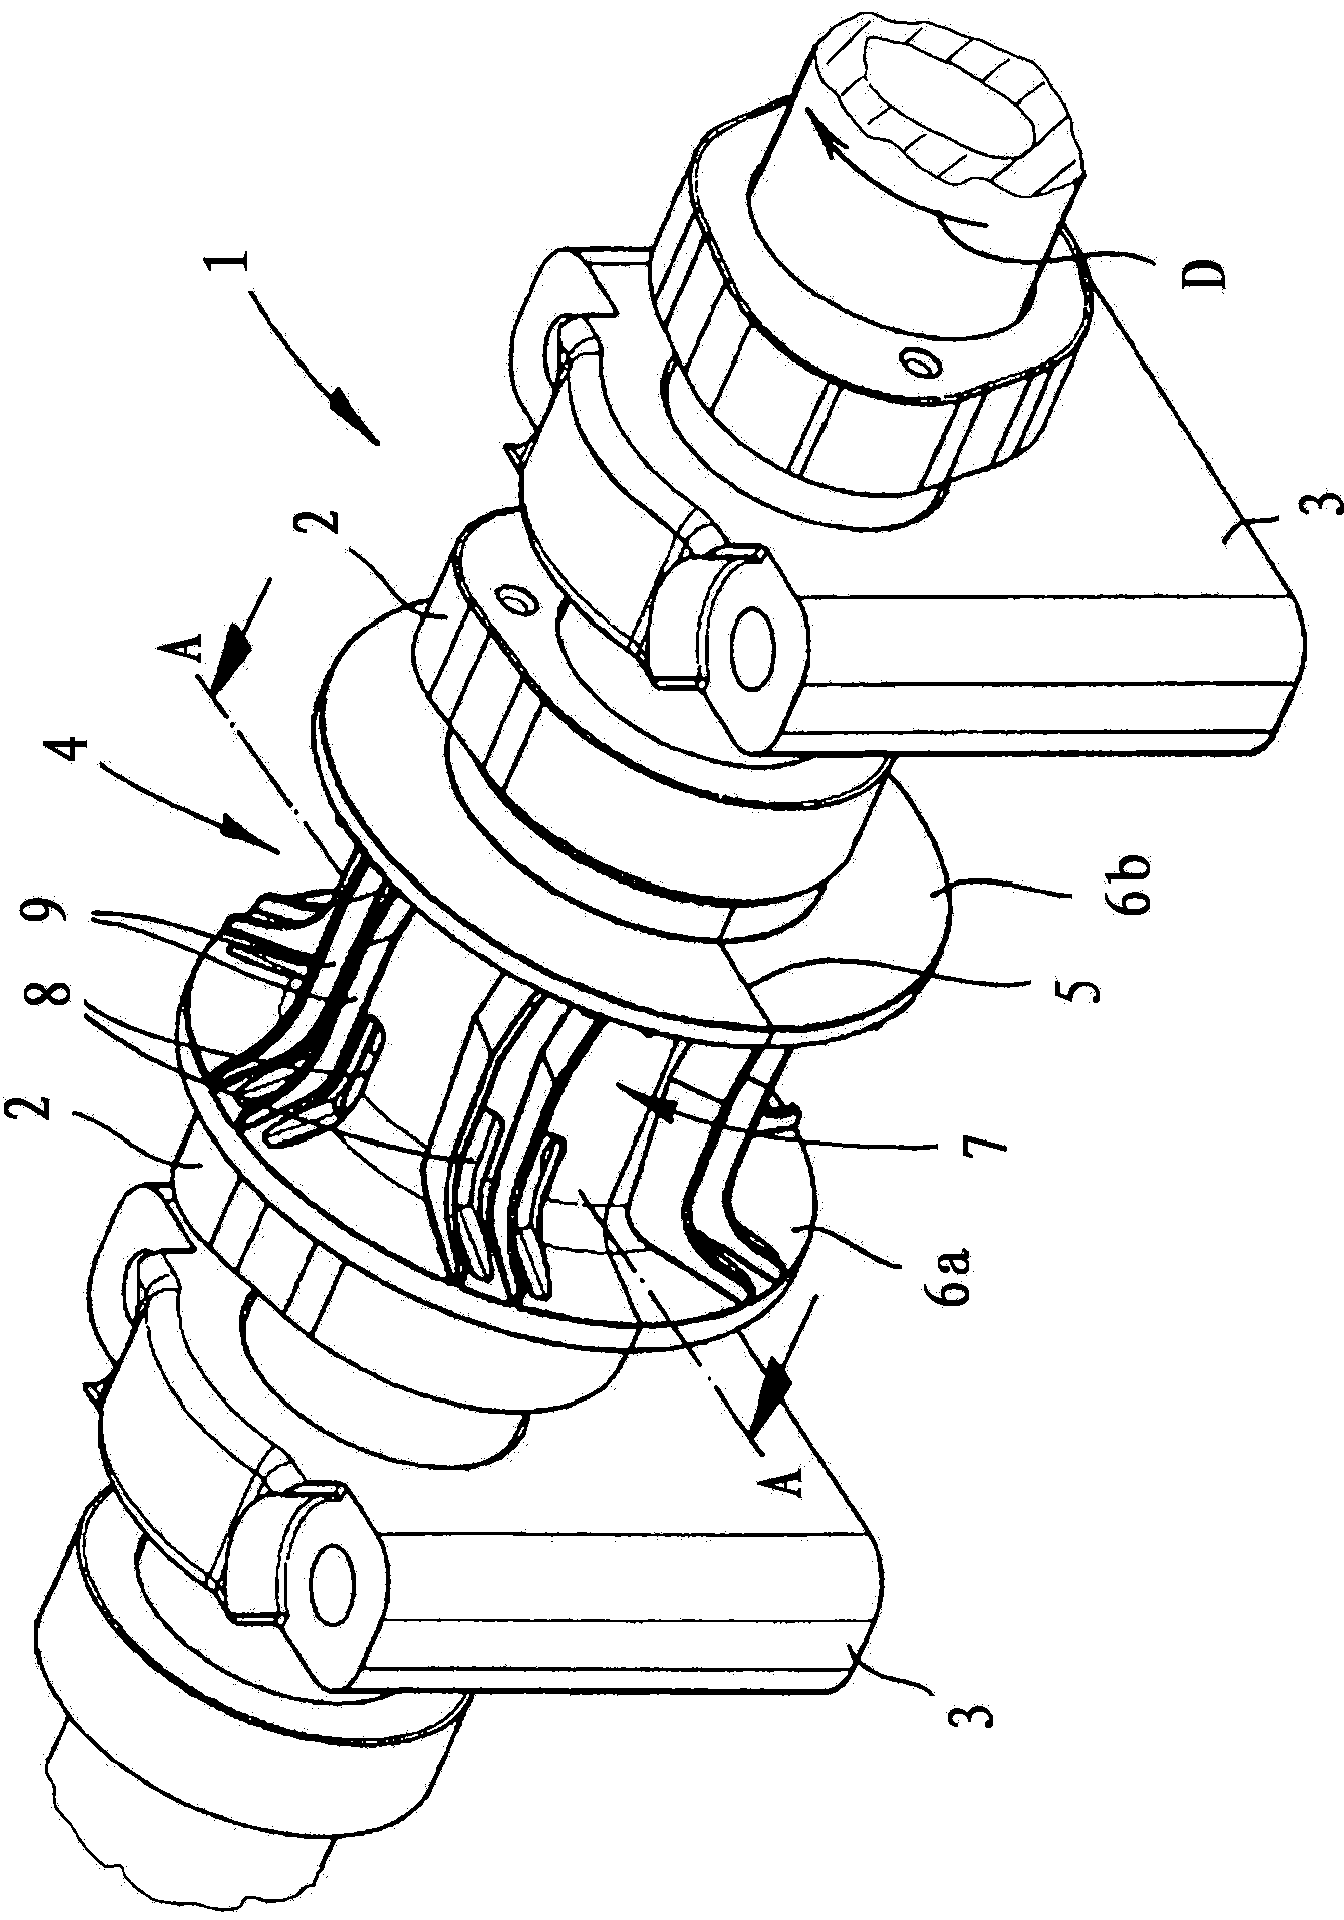 Shaft, particularly a cam shaft, comprising a hollow shaft section